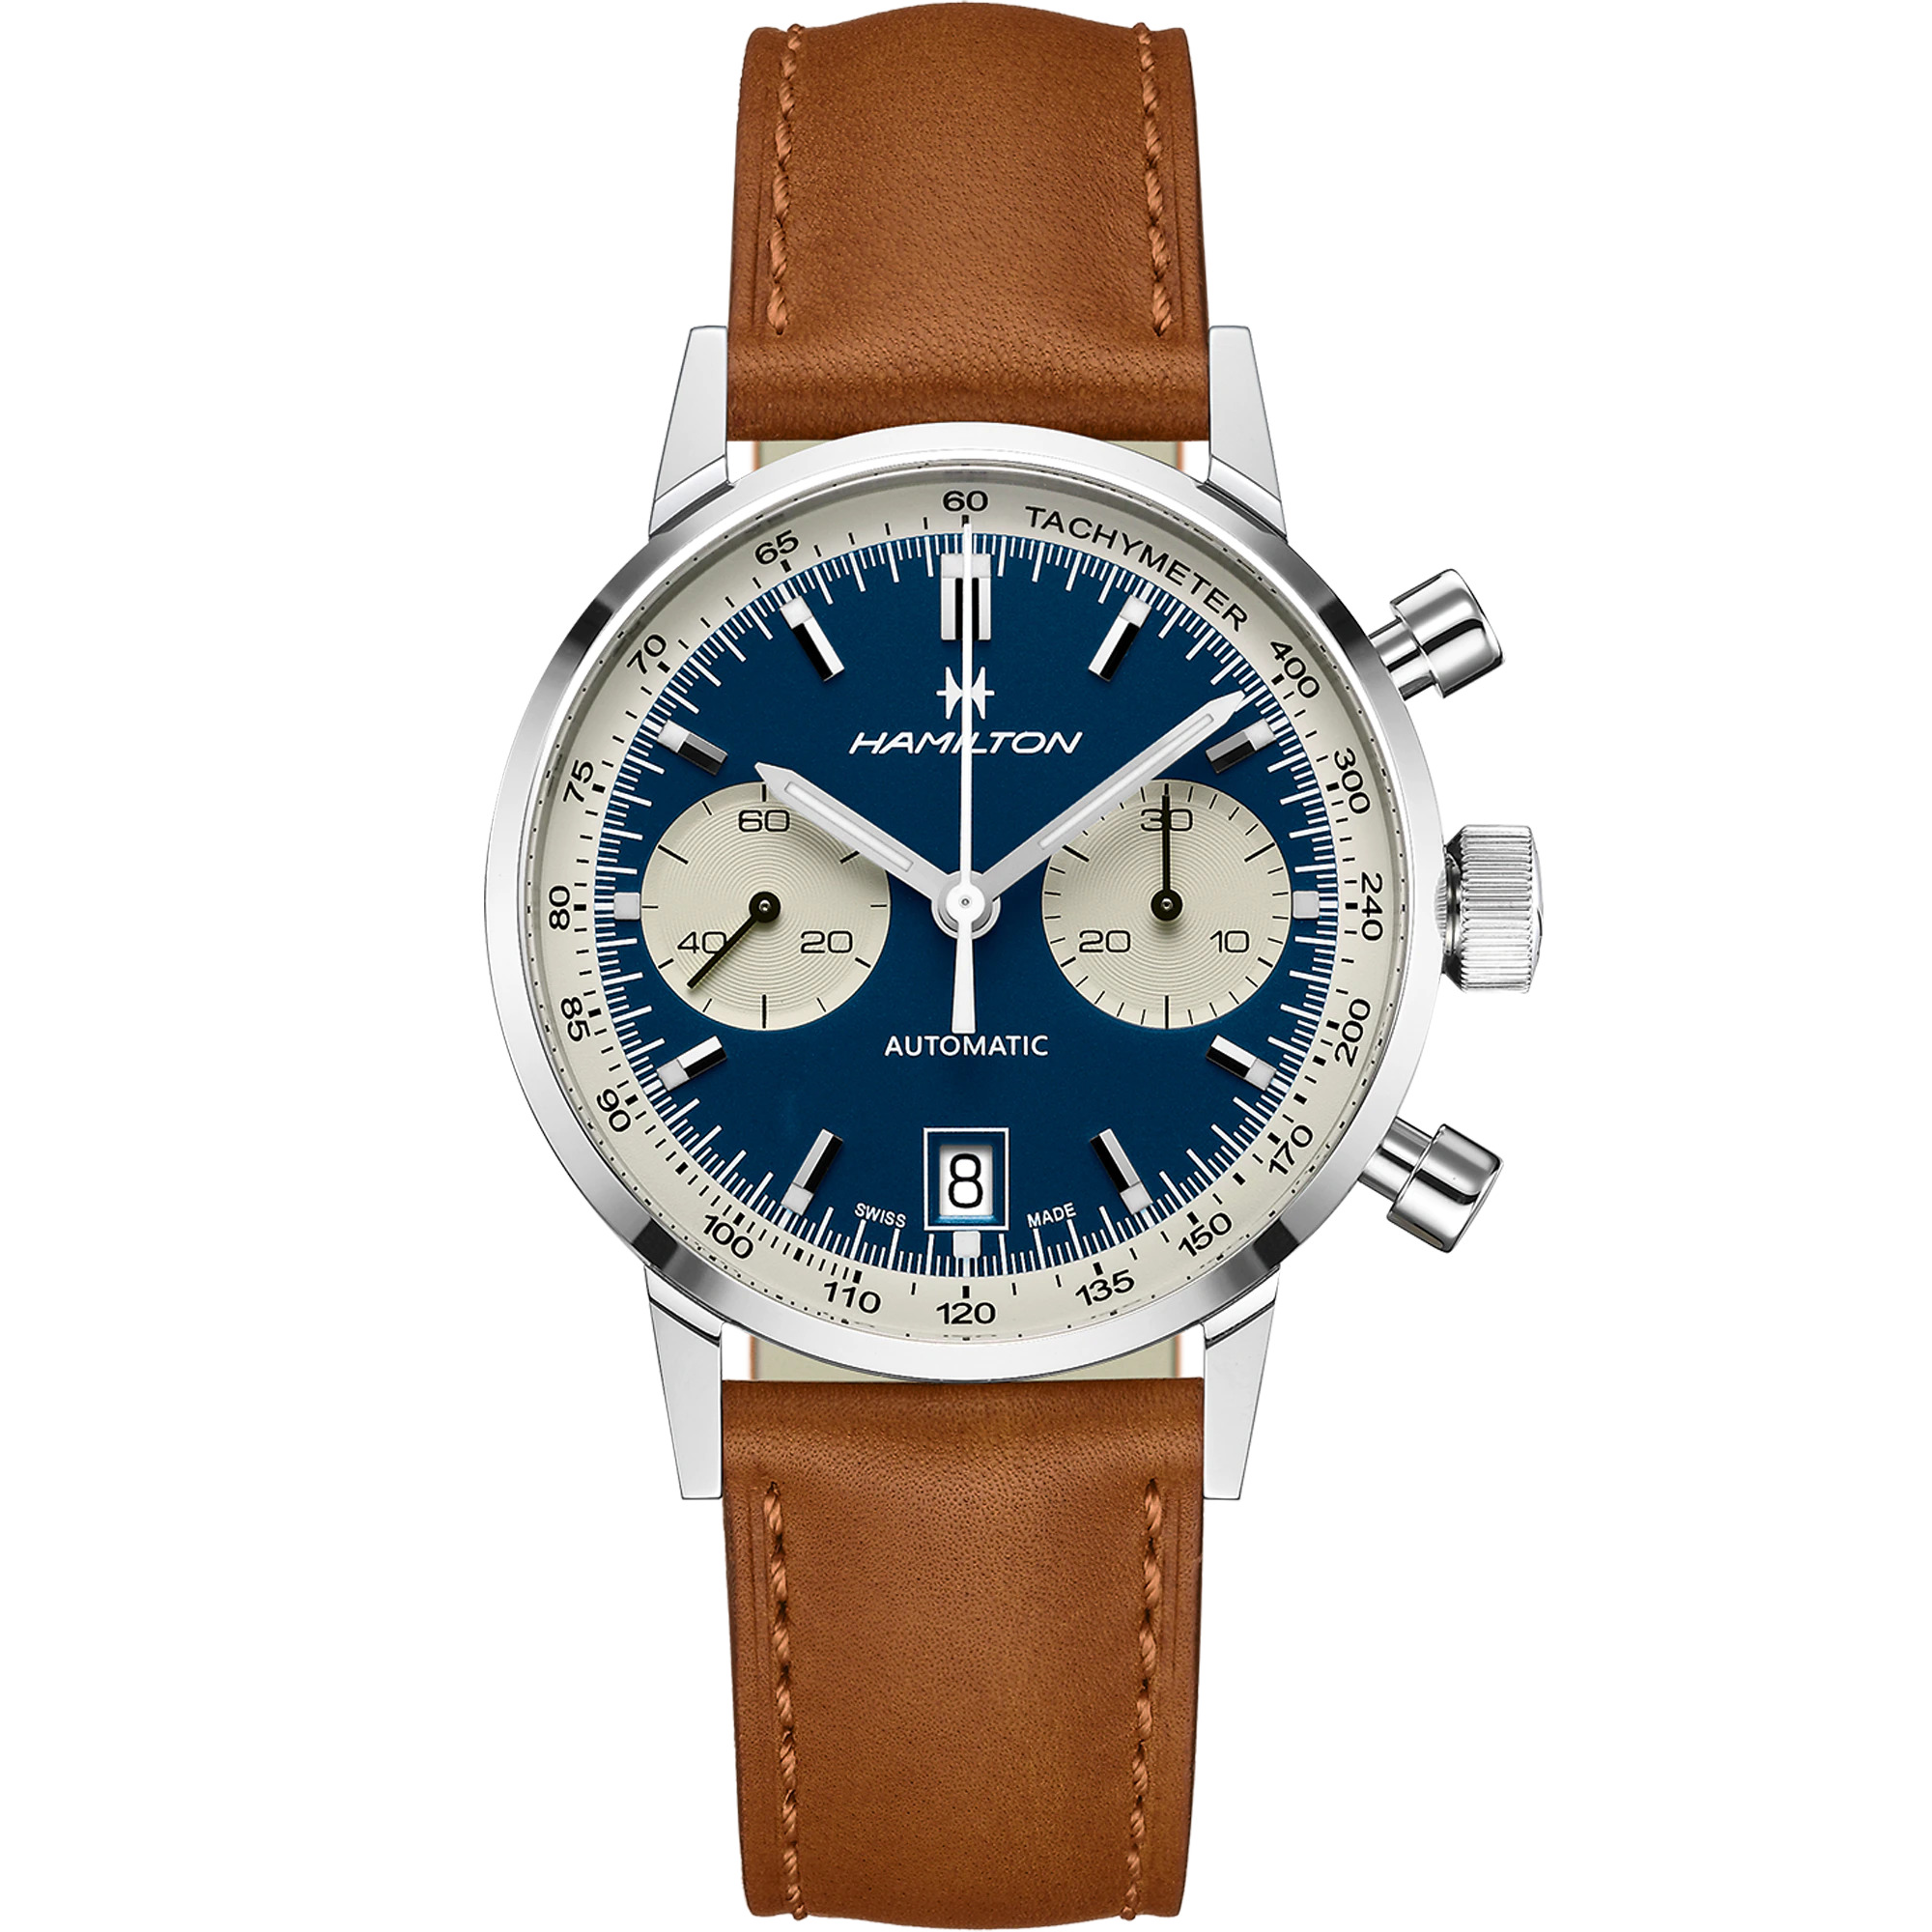 Hamilton Intra-Matic Chronograph Automatic Blue Dial Leather Watch (H38416541)